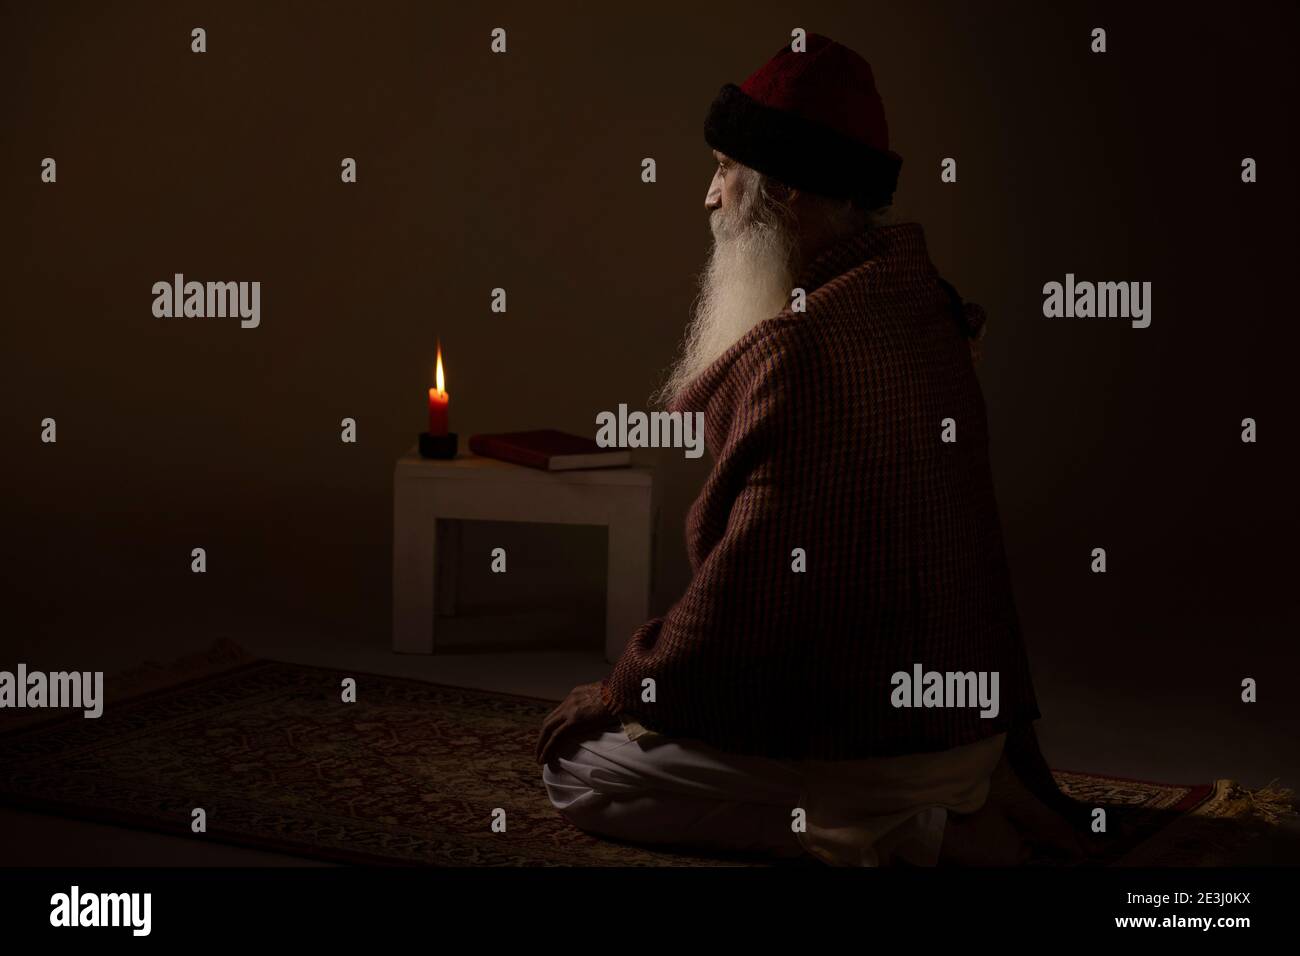 AN OLD MAN SITTING CALMLY AND PRAYING Stock Photo